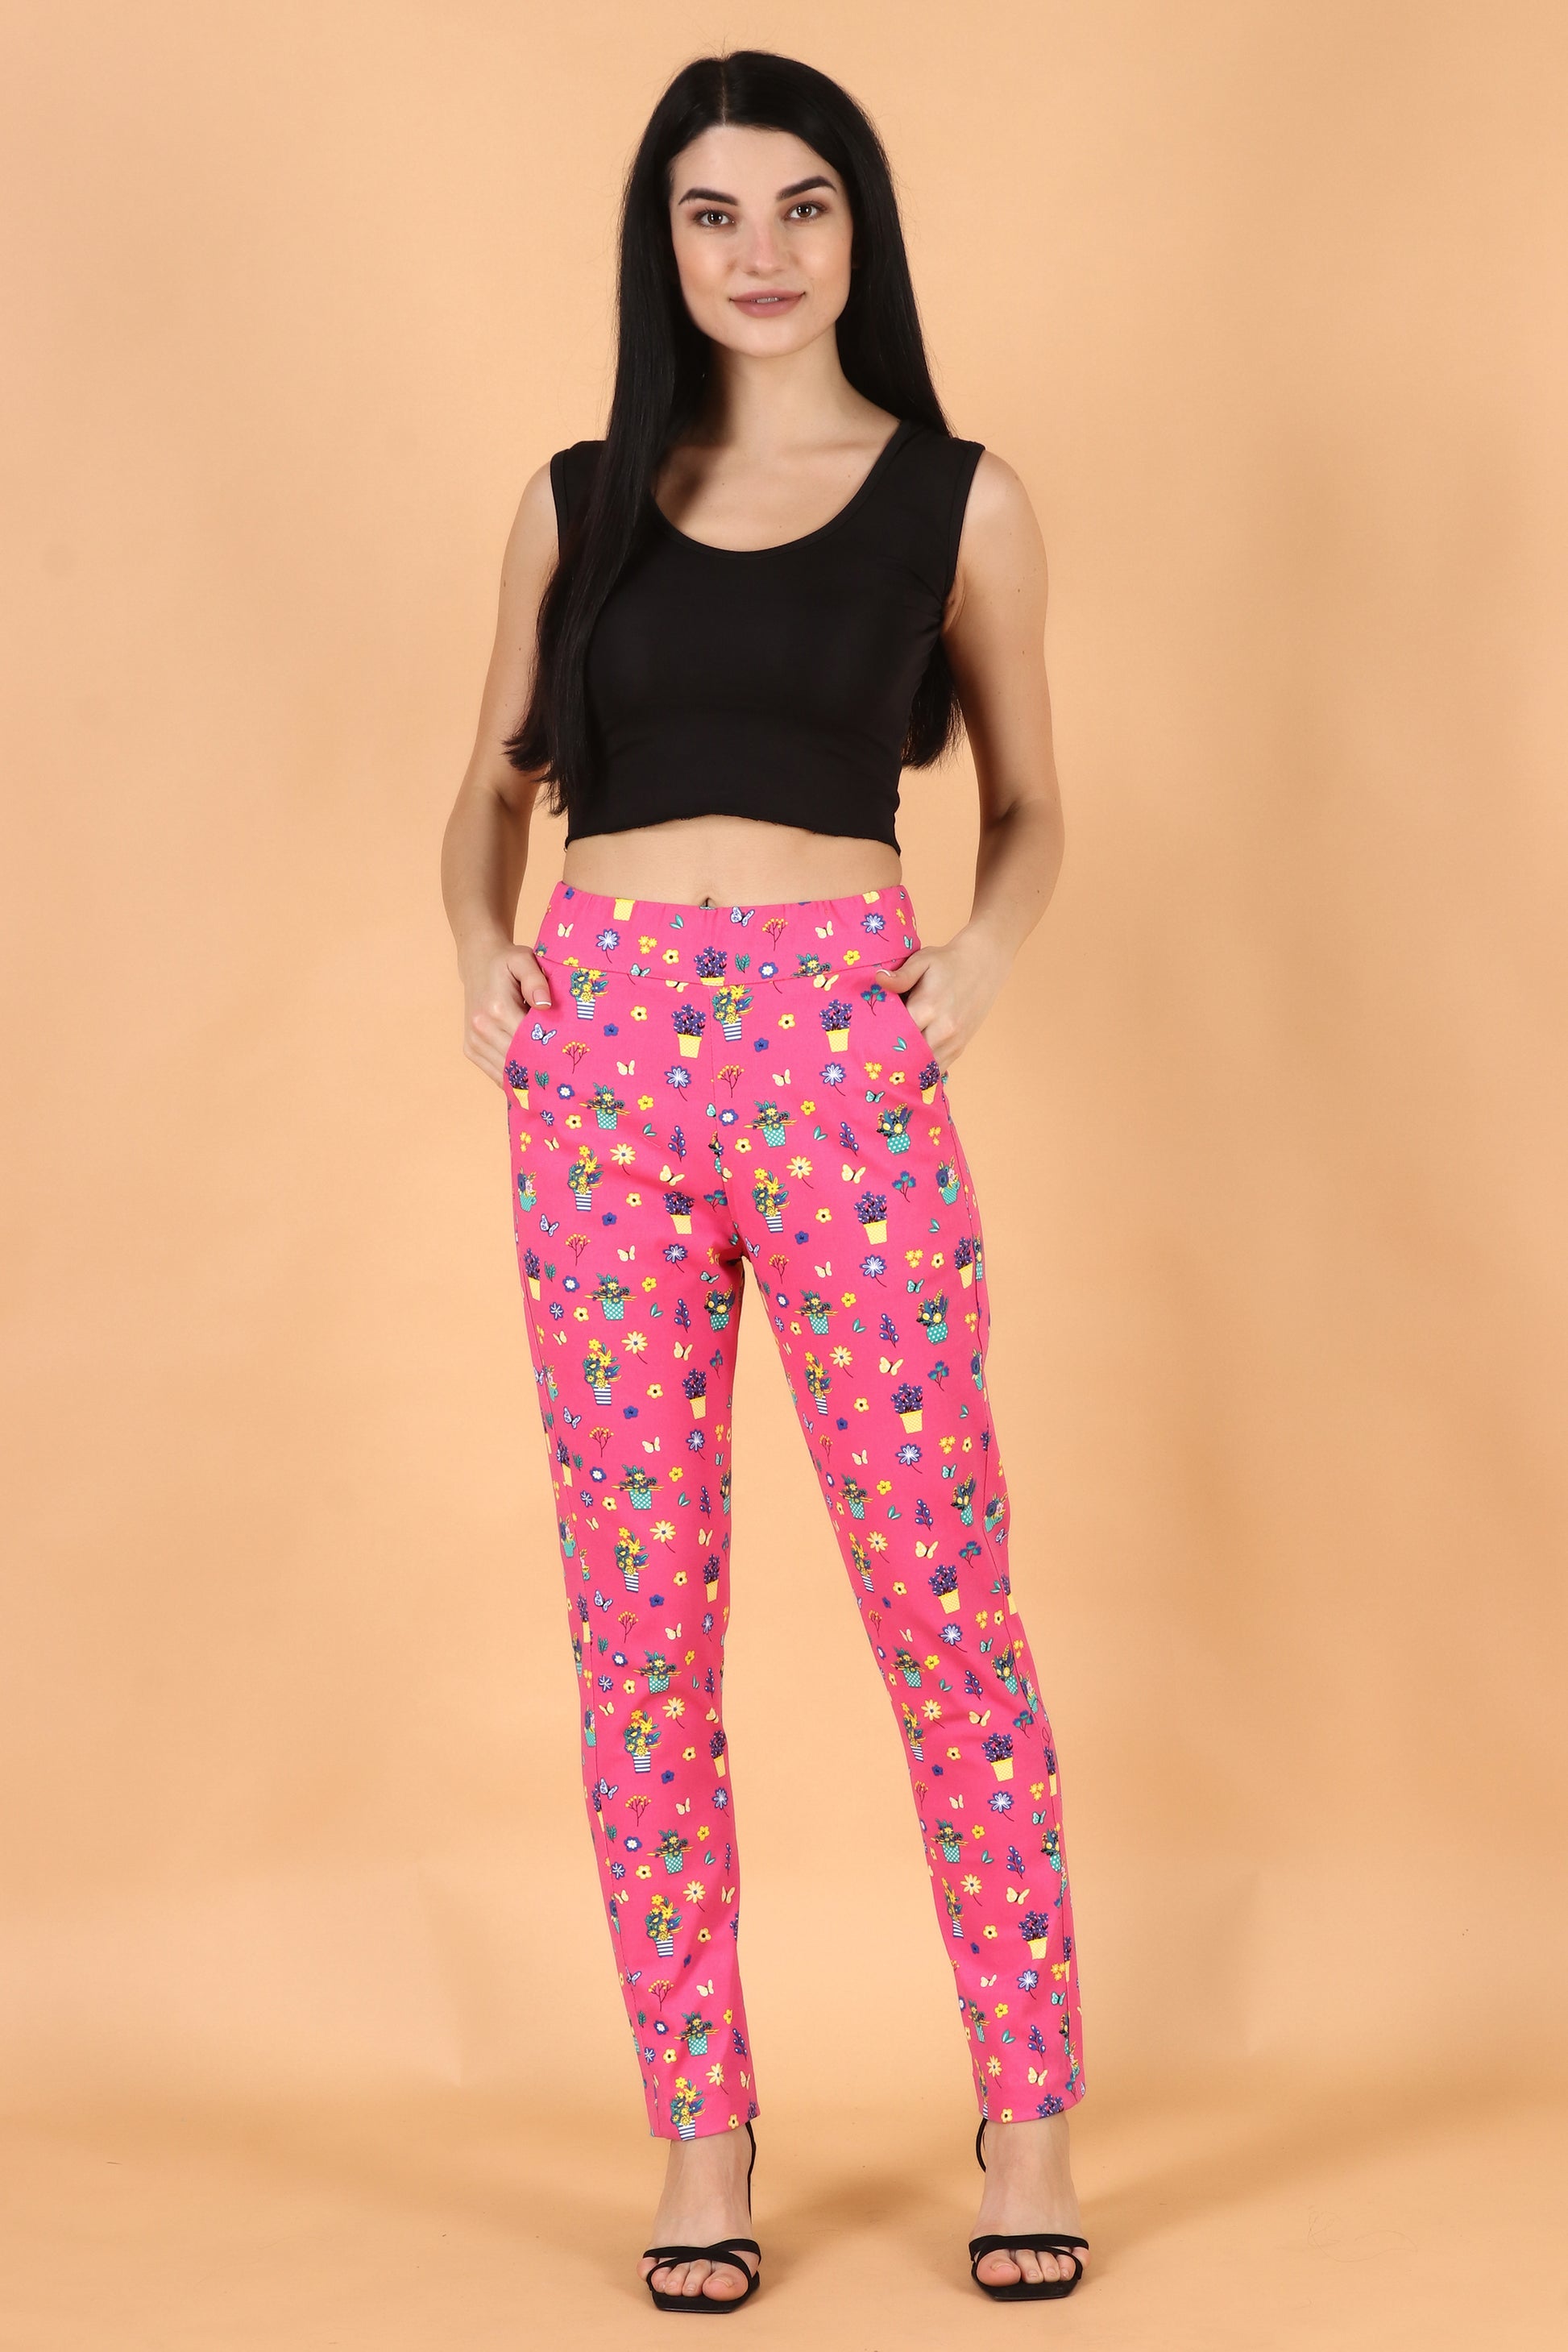 ALAVYA'S Bottom Wear Cotton Lycra Pants For Ladies (PINK) at Rs